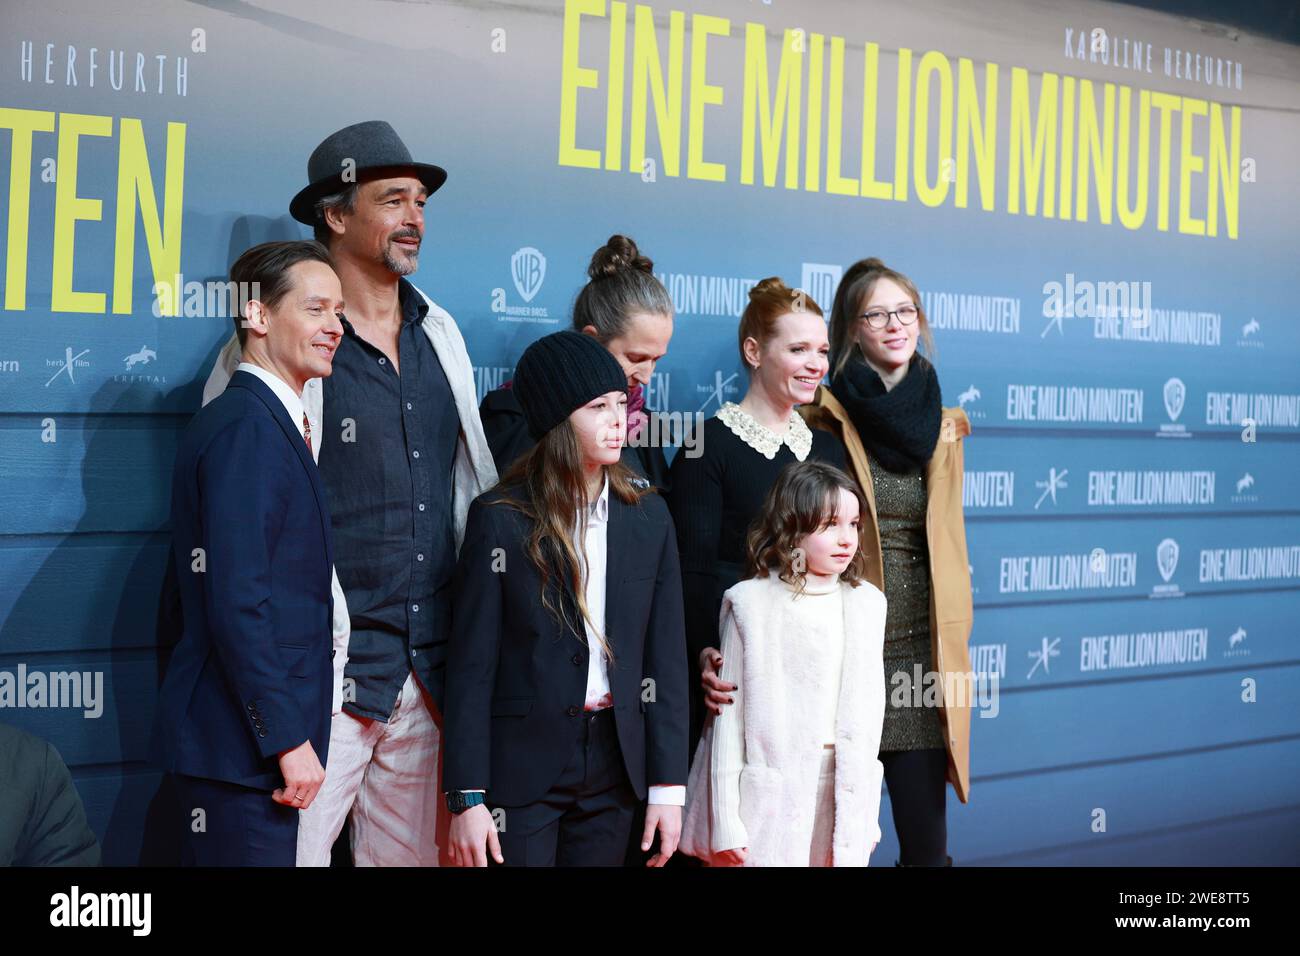 Berlin, Germany. 23rd Jan, 2024. Berlin: World premiere of 'Eine Million Minuten” at the Zoopalast. (Photo by Simone Kuhlmey/Pacific Press) Credit: Pacific Press Media Production Corp./Alamy Live News Stock Photo